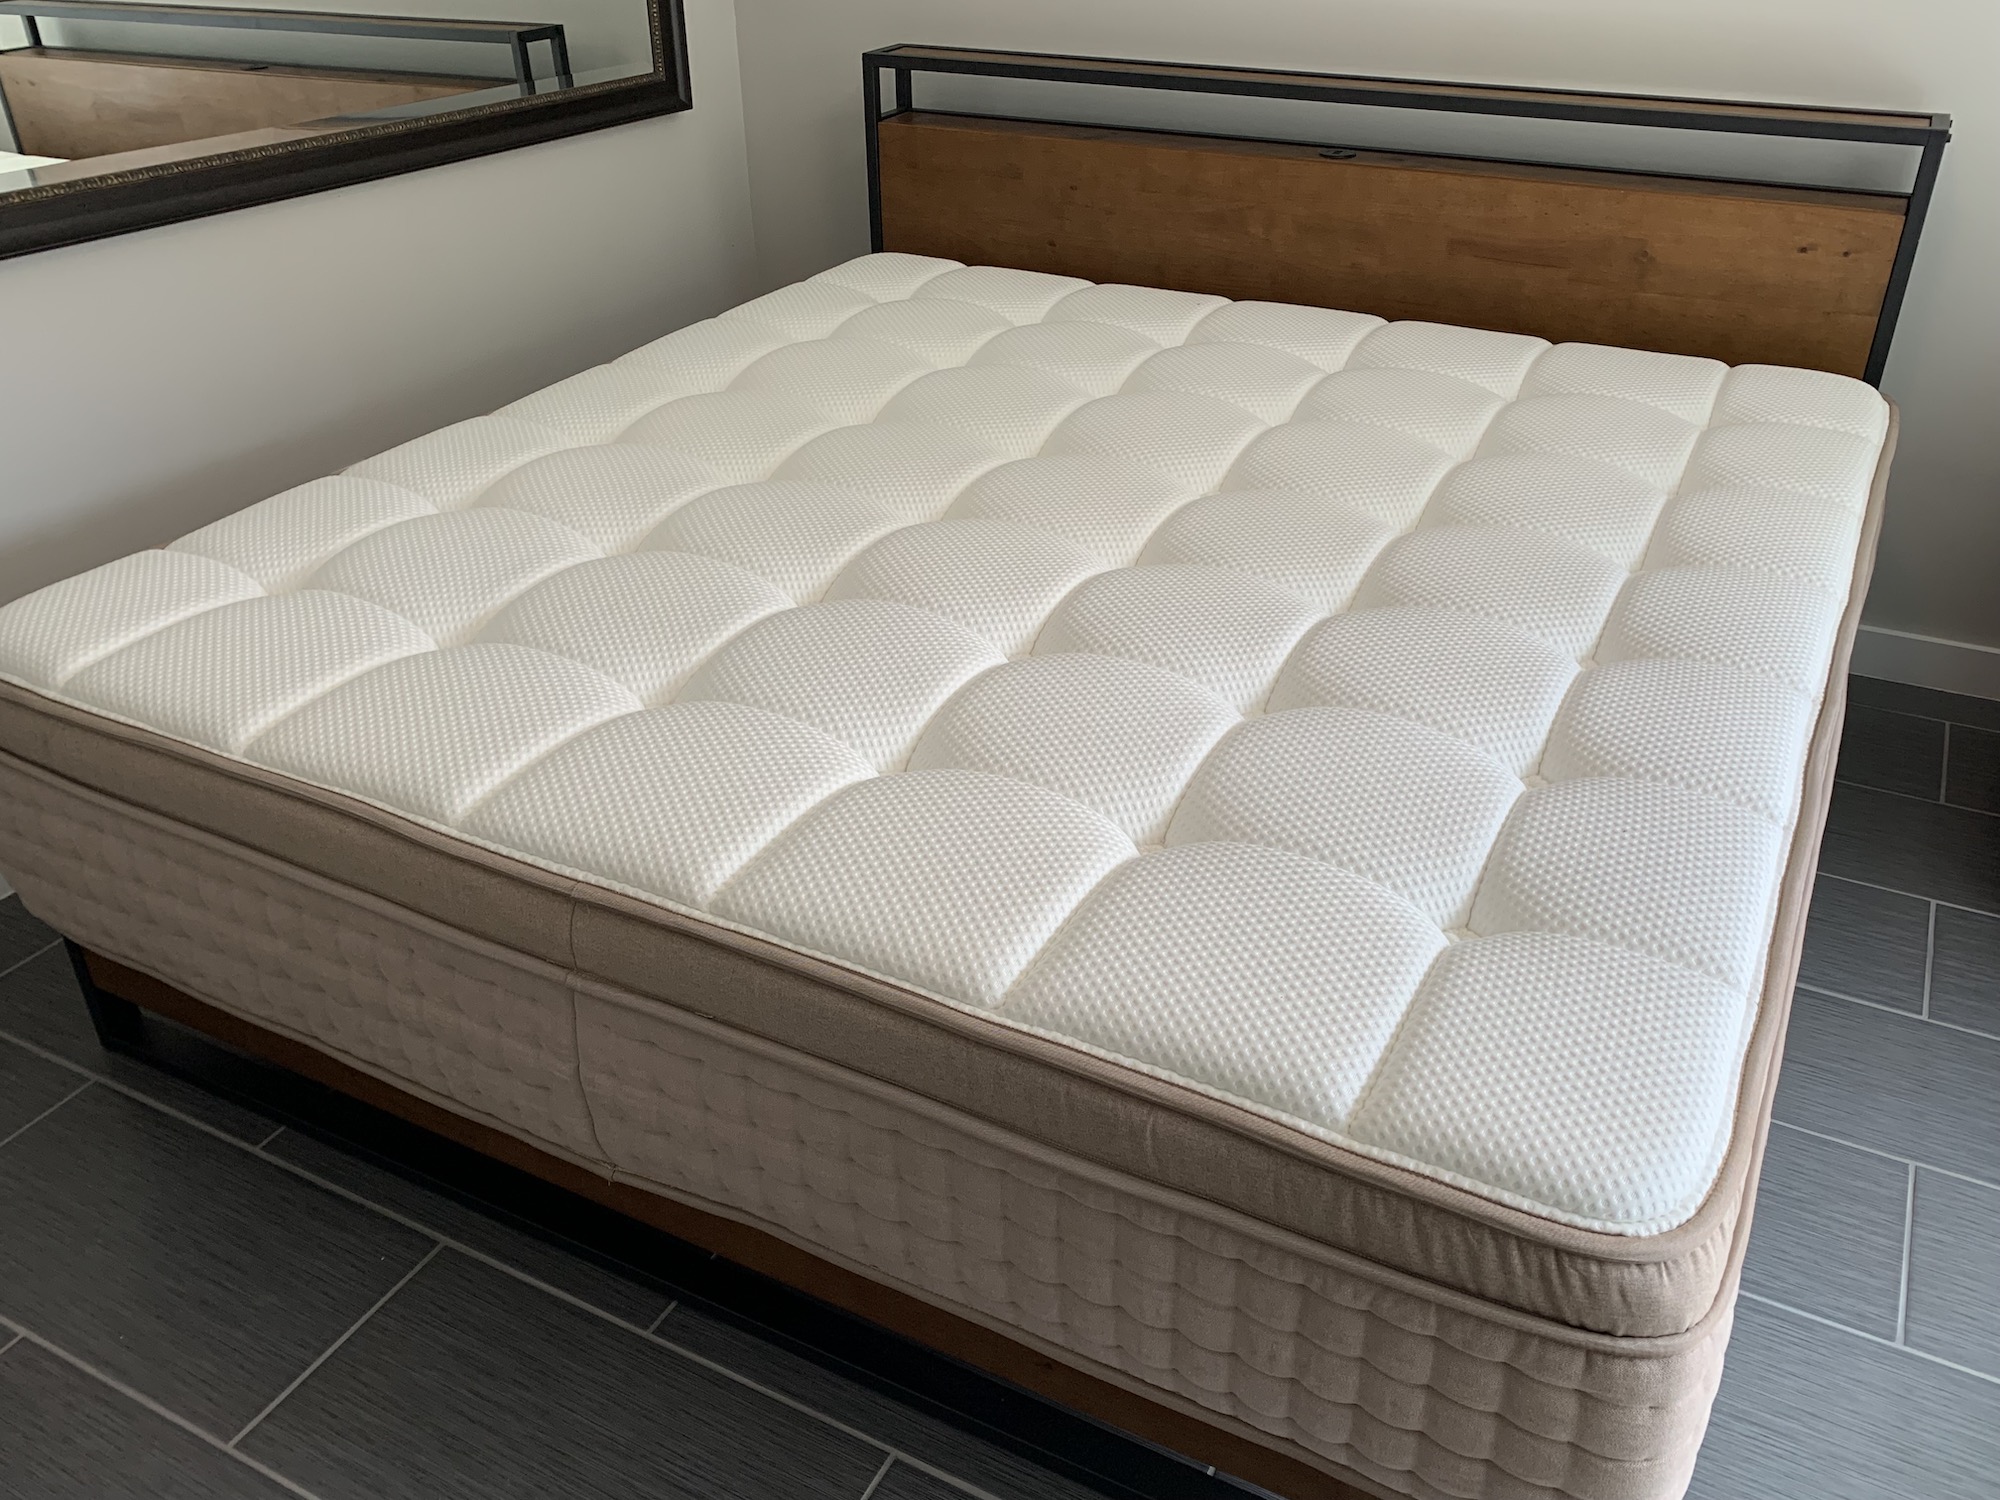 is it safe to buy used mattress?